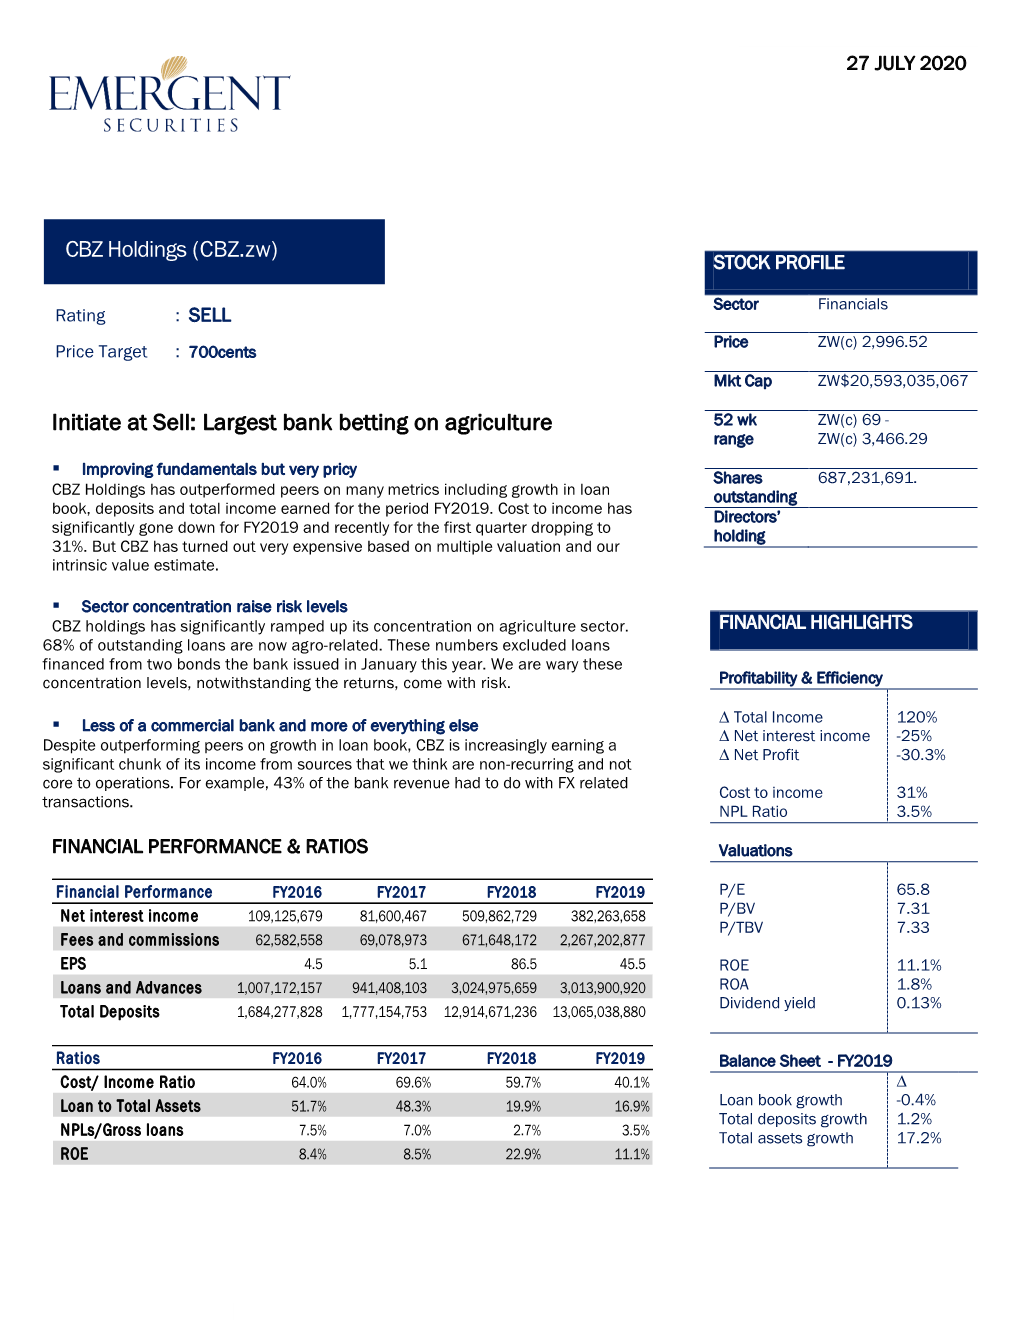 Initial Equity Research Report